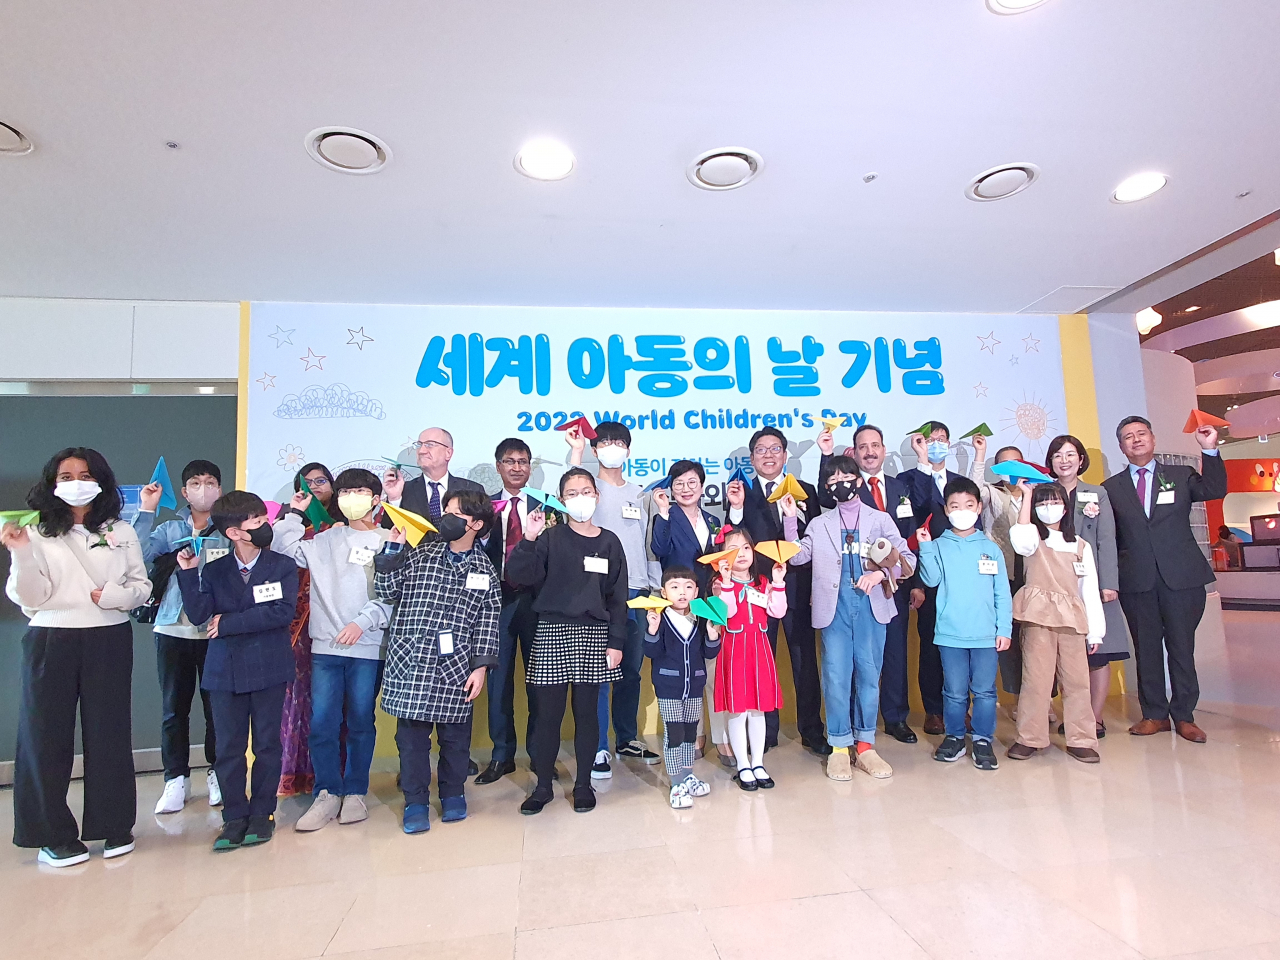 Children artists and participants pose for a photo holding paper airplanes at the World Children's Day event held at the Children's Museum under the National Museum of Korea in Yongsan, Seoul, Sunday. (Yang Jung-won/The Korea Herald)